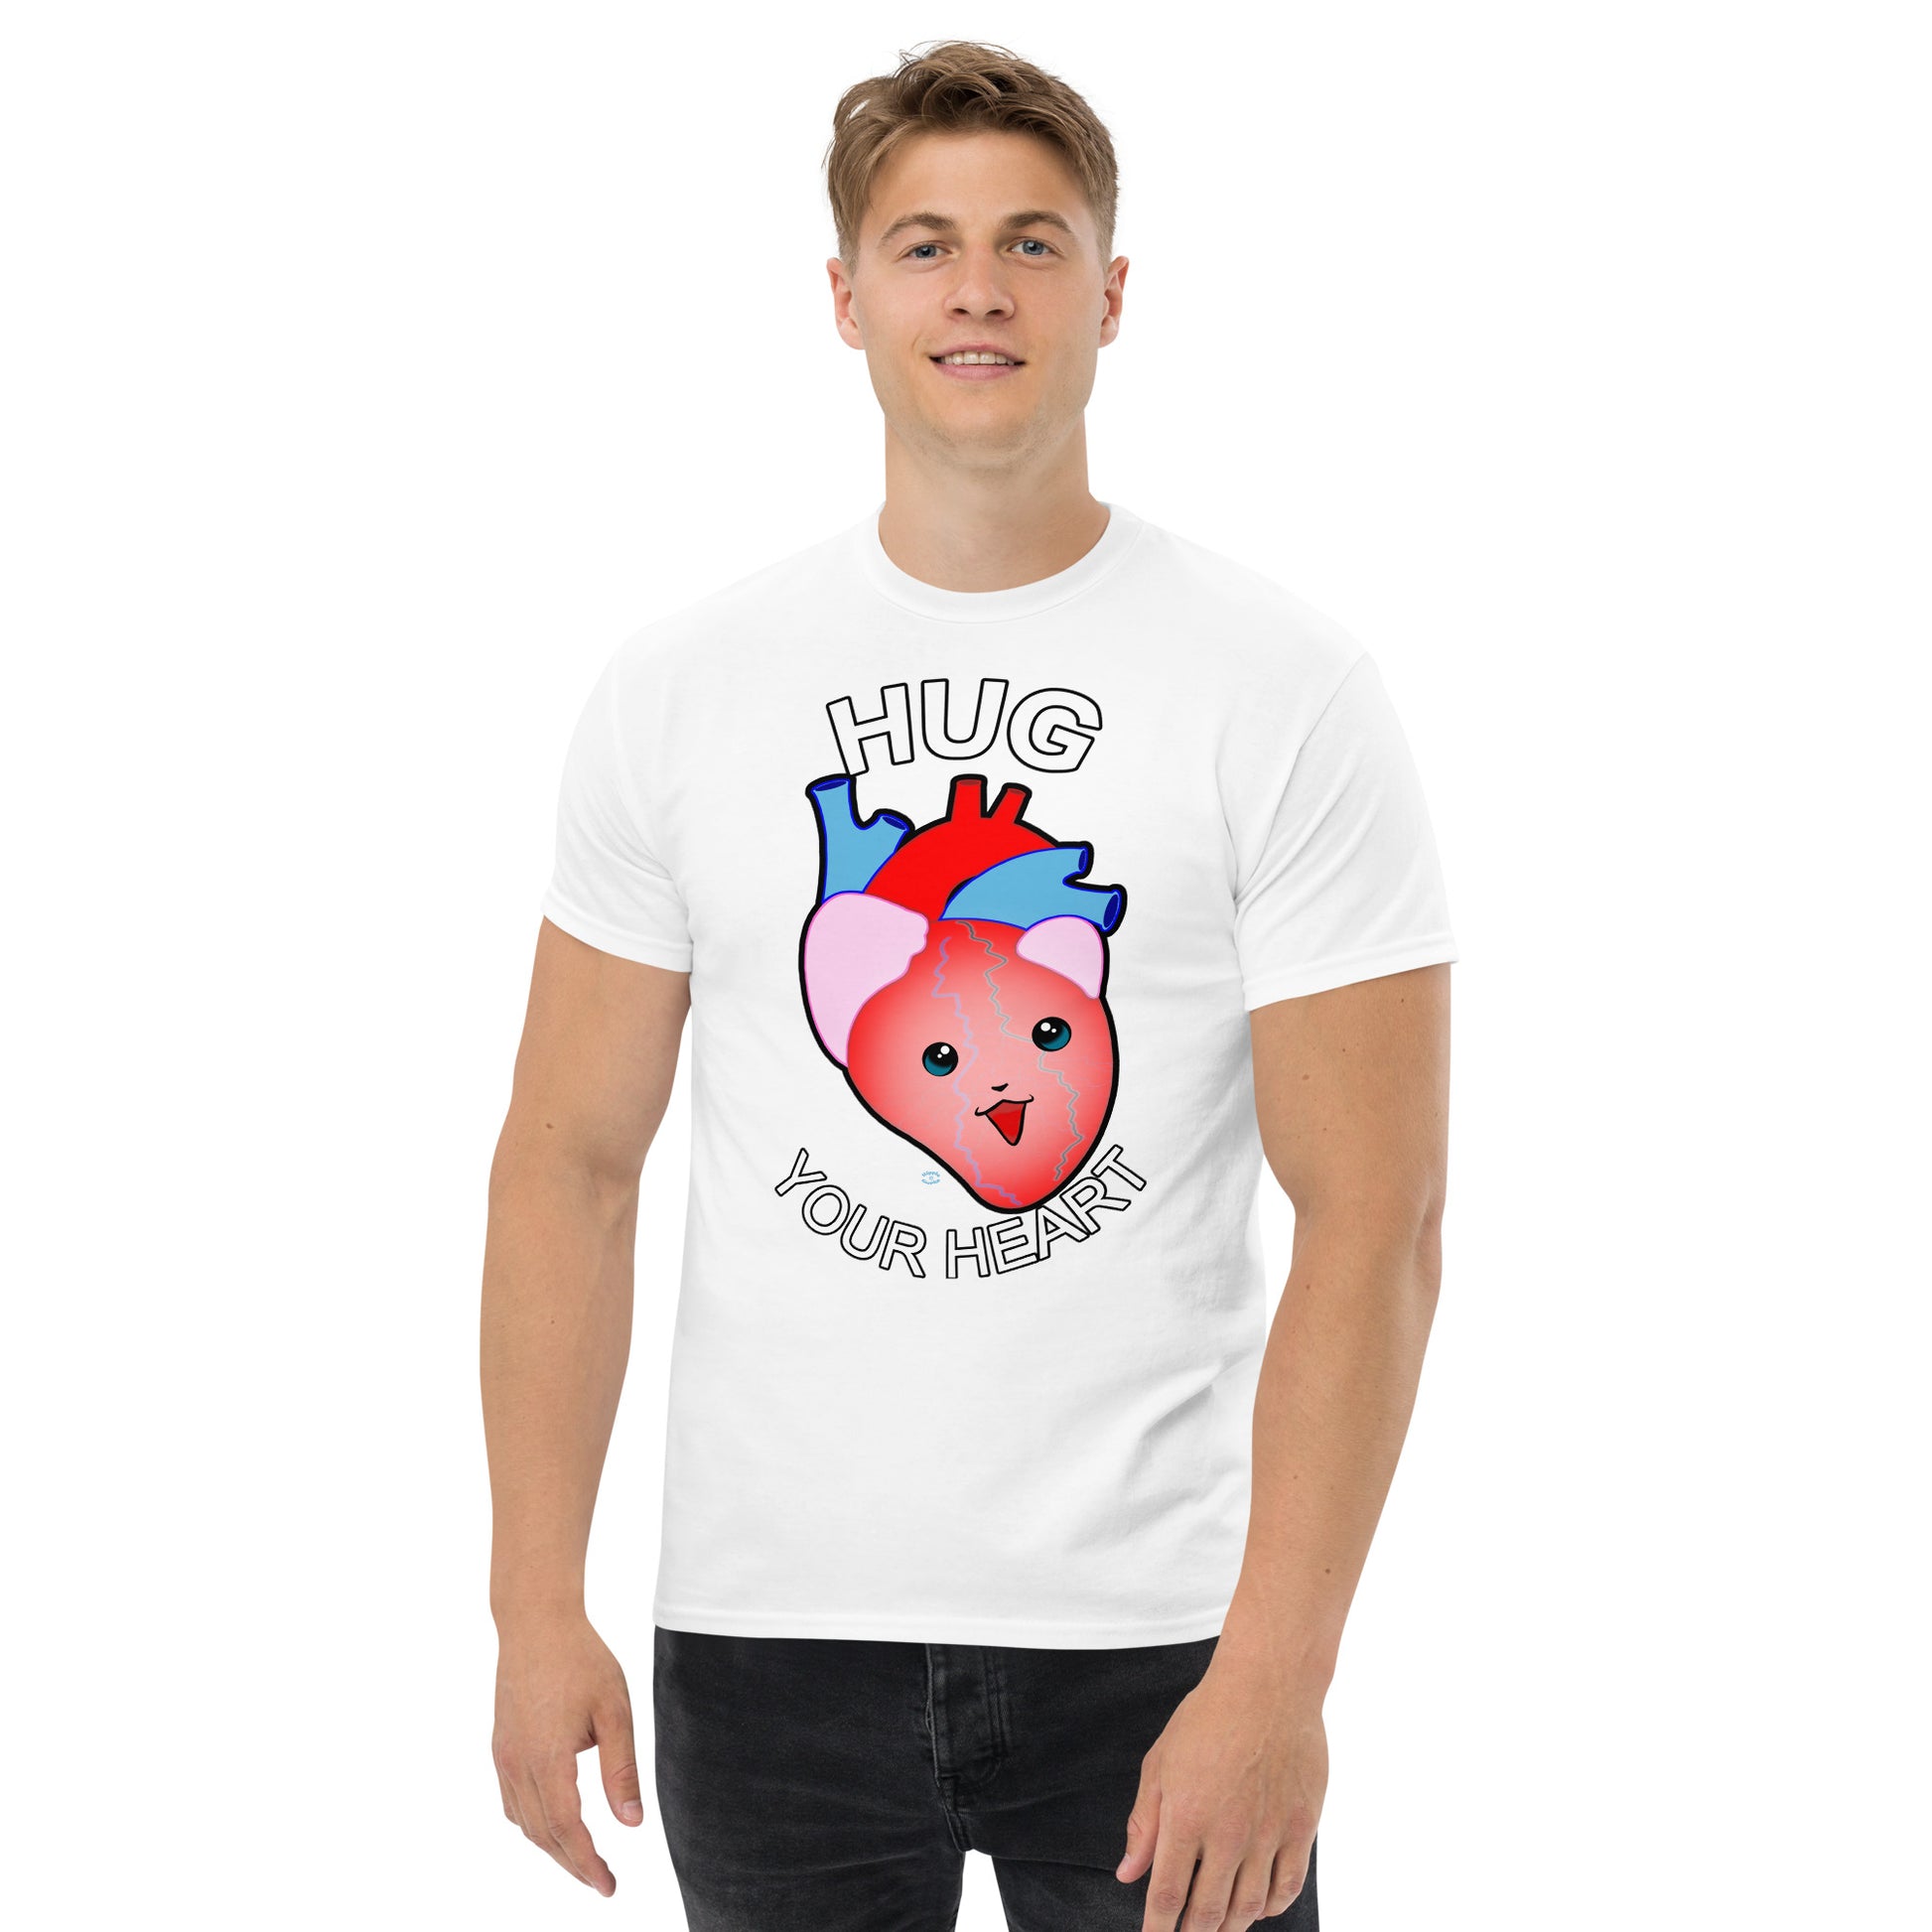 A Picture of a man wearing a short sleeved tshirt with a picture on the front of a smiling heart with the text "HUG Your Heart" - color white